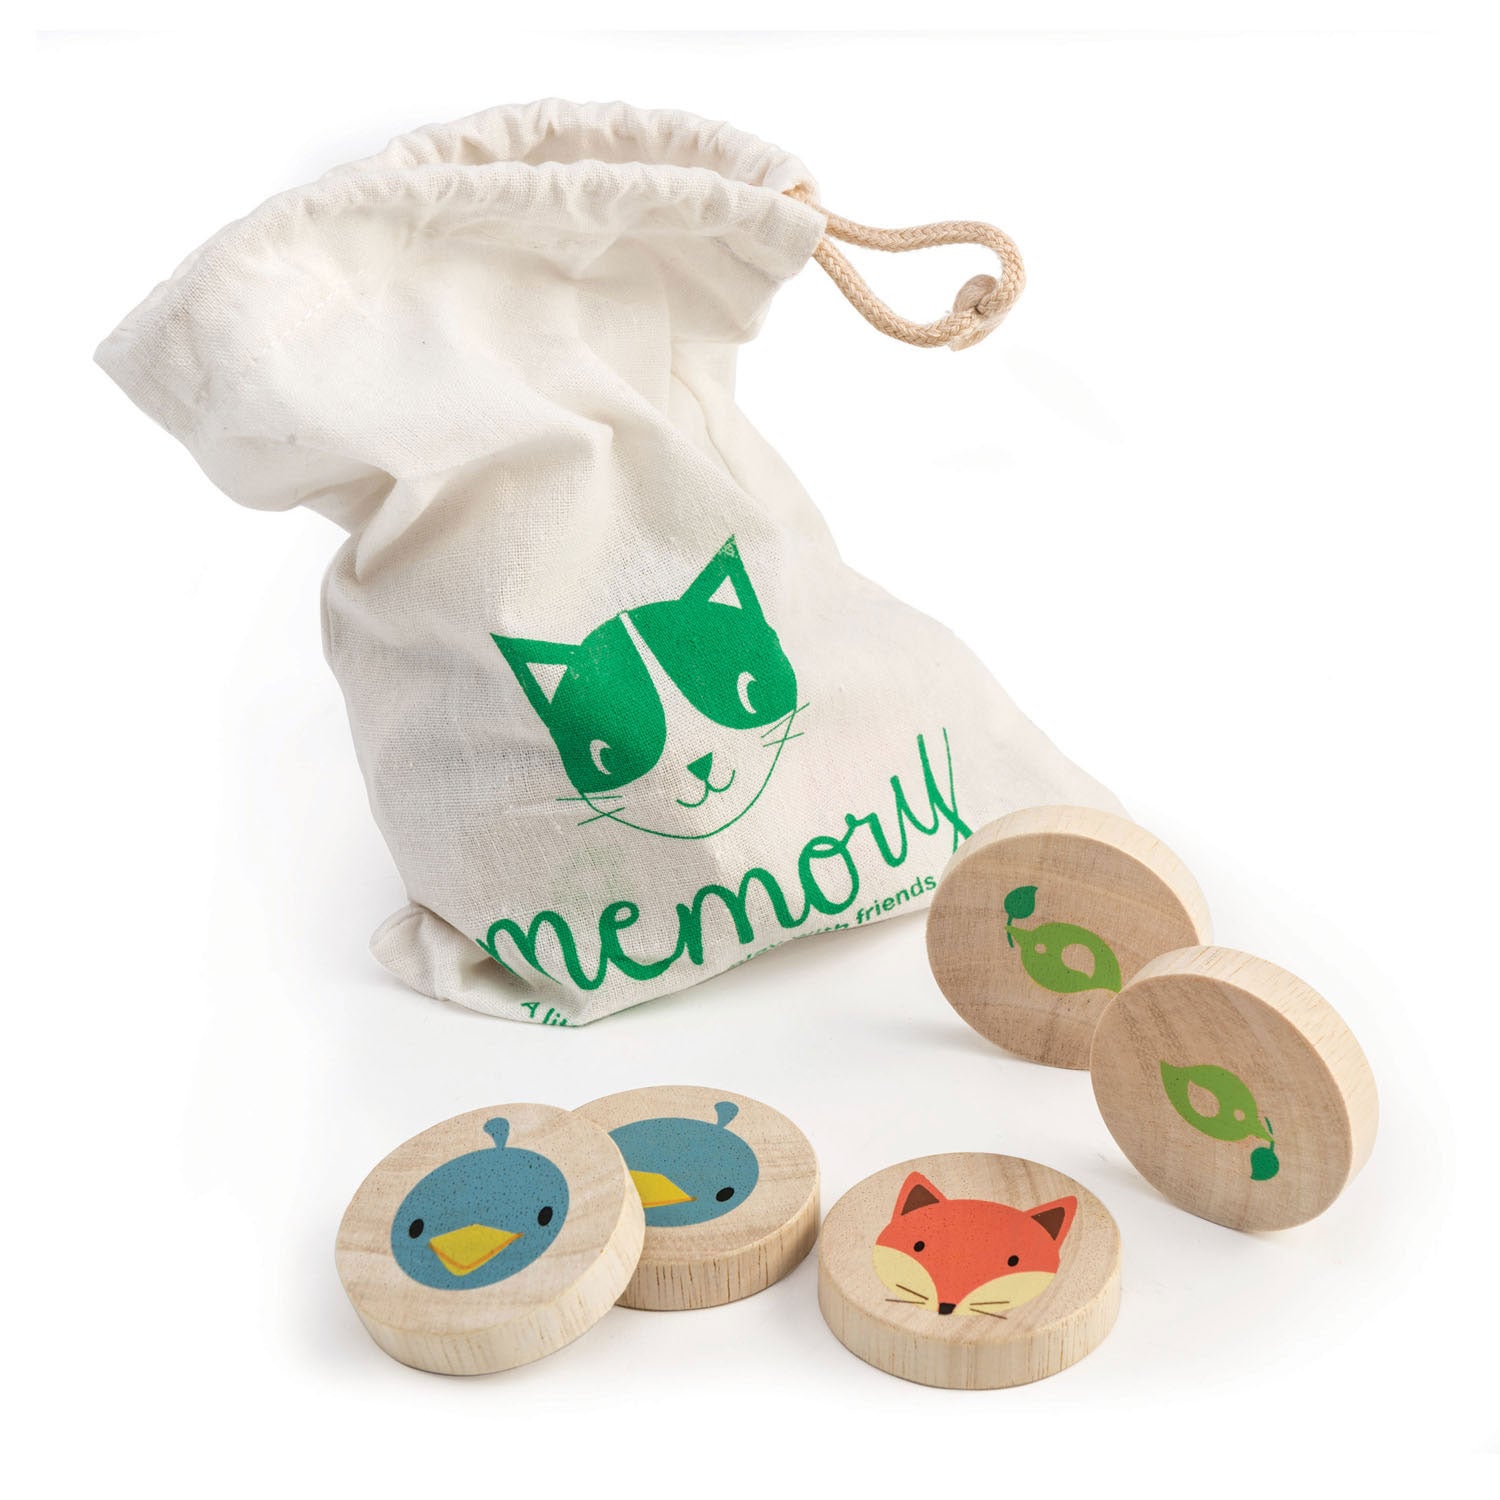 <p>A little memory game to play with friends! The Clever Cat Memory Game has 16 printed solid wood discs with 8 different animal faces for matching. A canvas drawstring bag is included for easy storage and transport. </p>
<p>Age range: 18 months +  </p>
<p>Product size: 6.50&quot; x 7.76&quot; x 0.39&quot;  </p>
<p>Weight: 0.48 lbs</p>
<p><strong><a href="https://kids.allwomenstalk.com/blogs/tender-leaf-blog/design-a-cat-collar">Design a Cat Collar Printable</a></strong></p>
